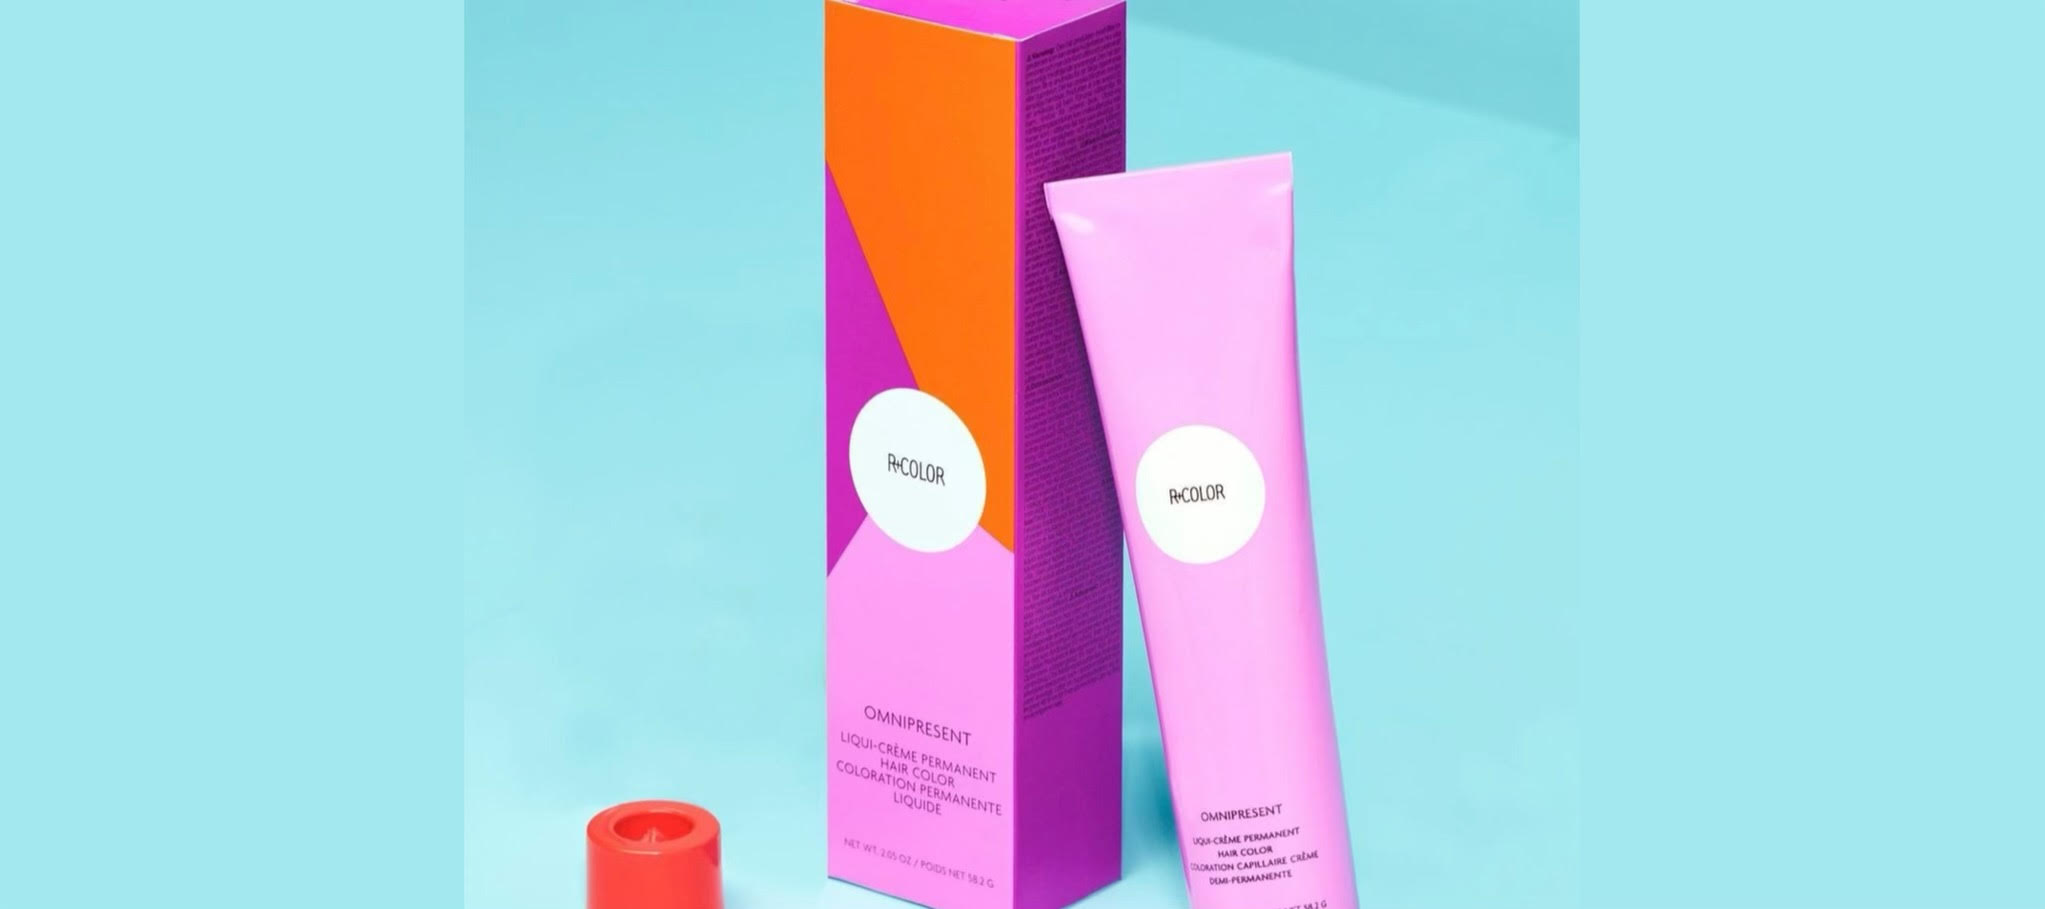 New R+Color<br/>Gluten Free<br/>Paraben Free<br/> Silicone Free